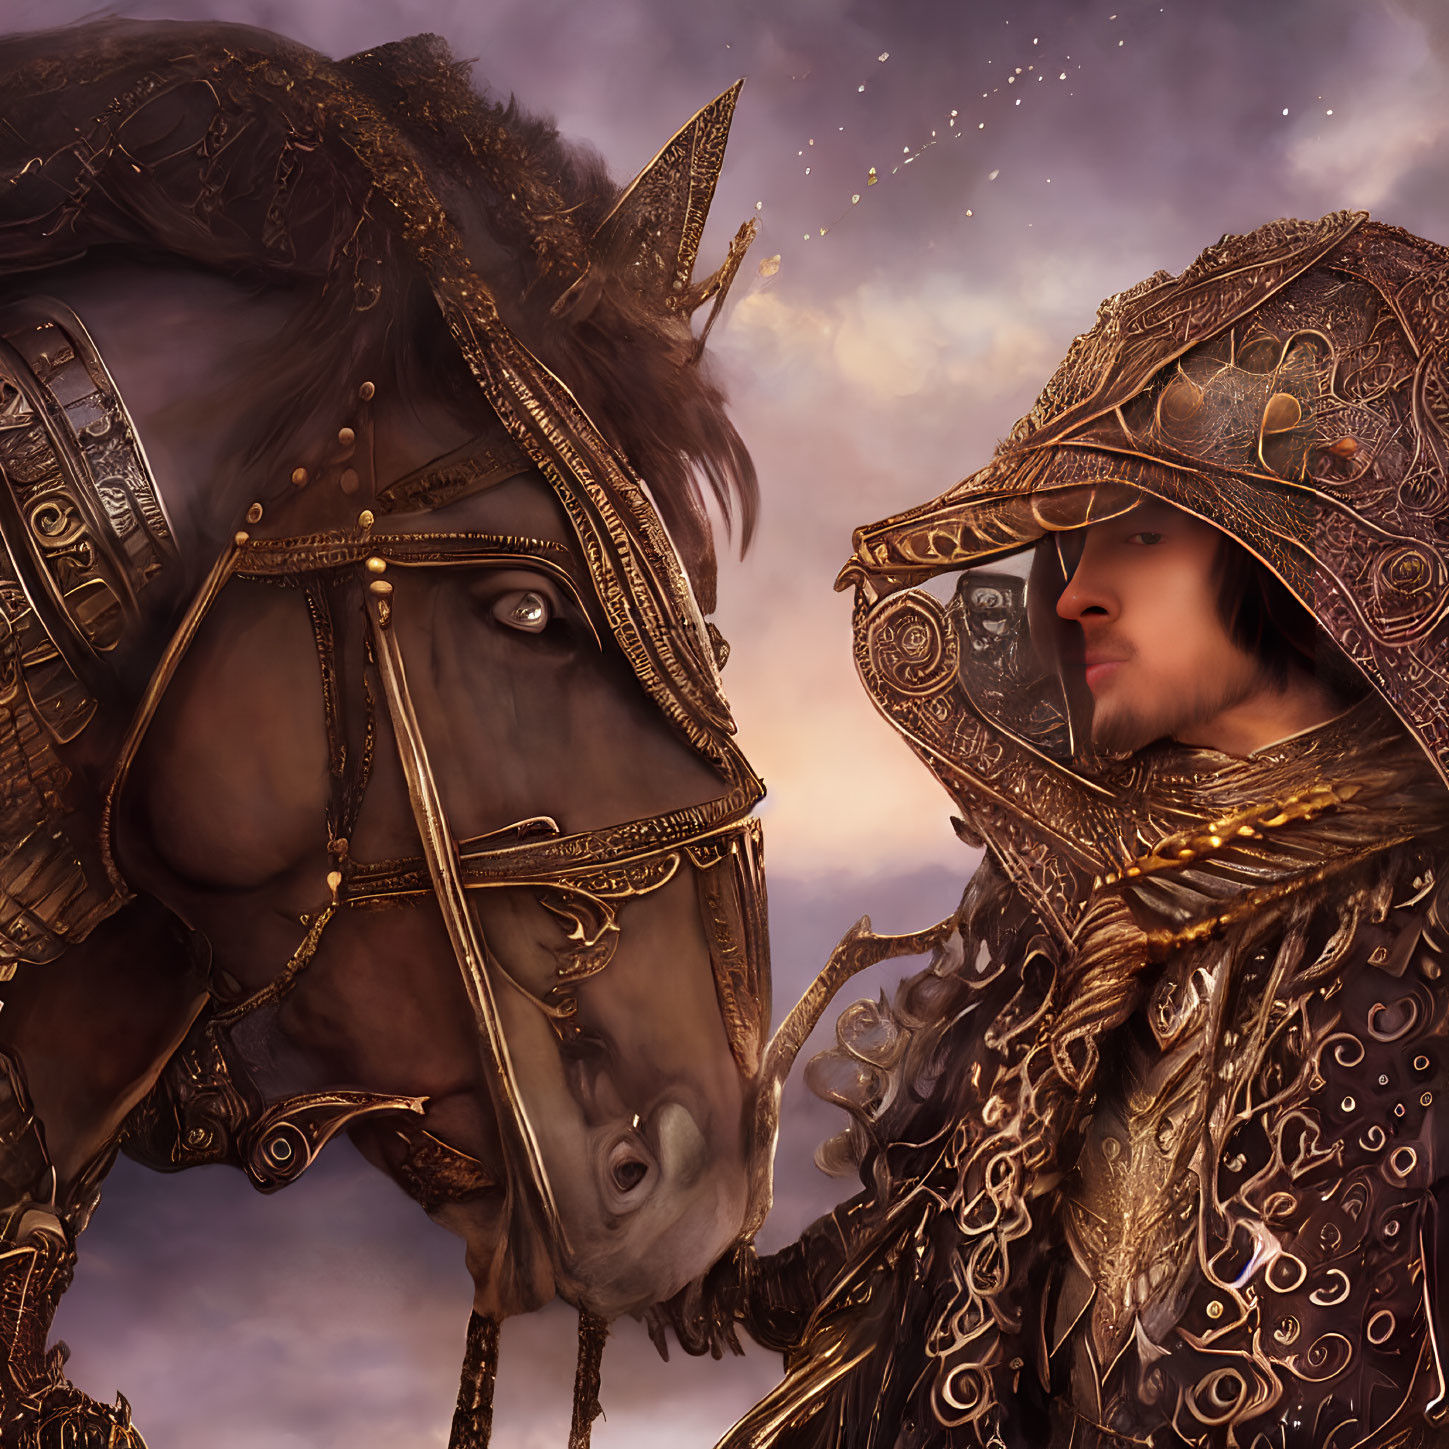 Elaborate golden armor person connects with adorned horse at twilight